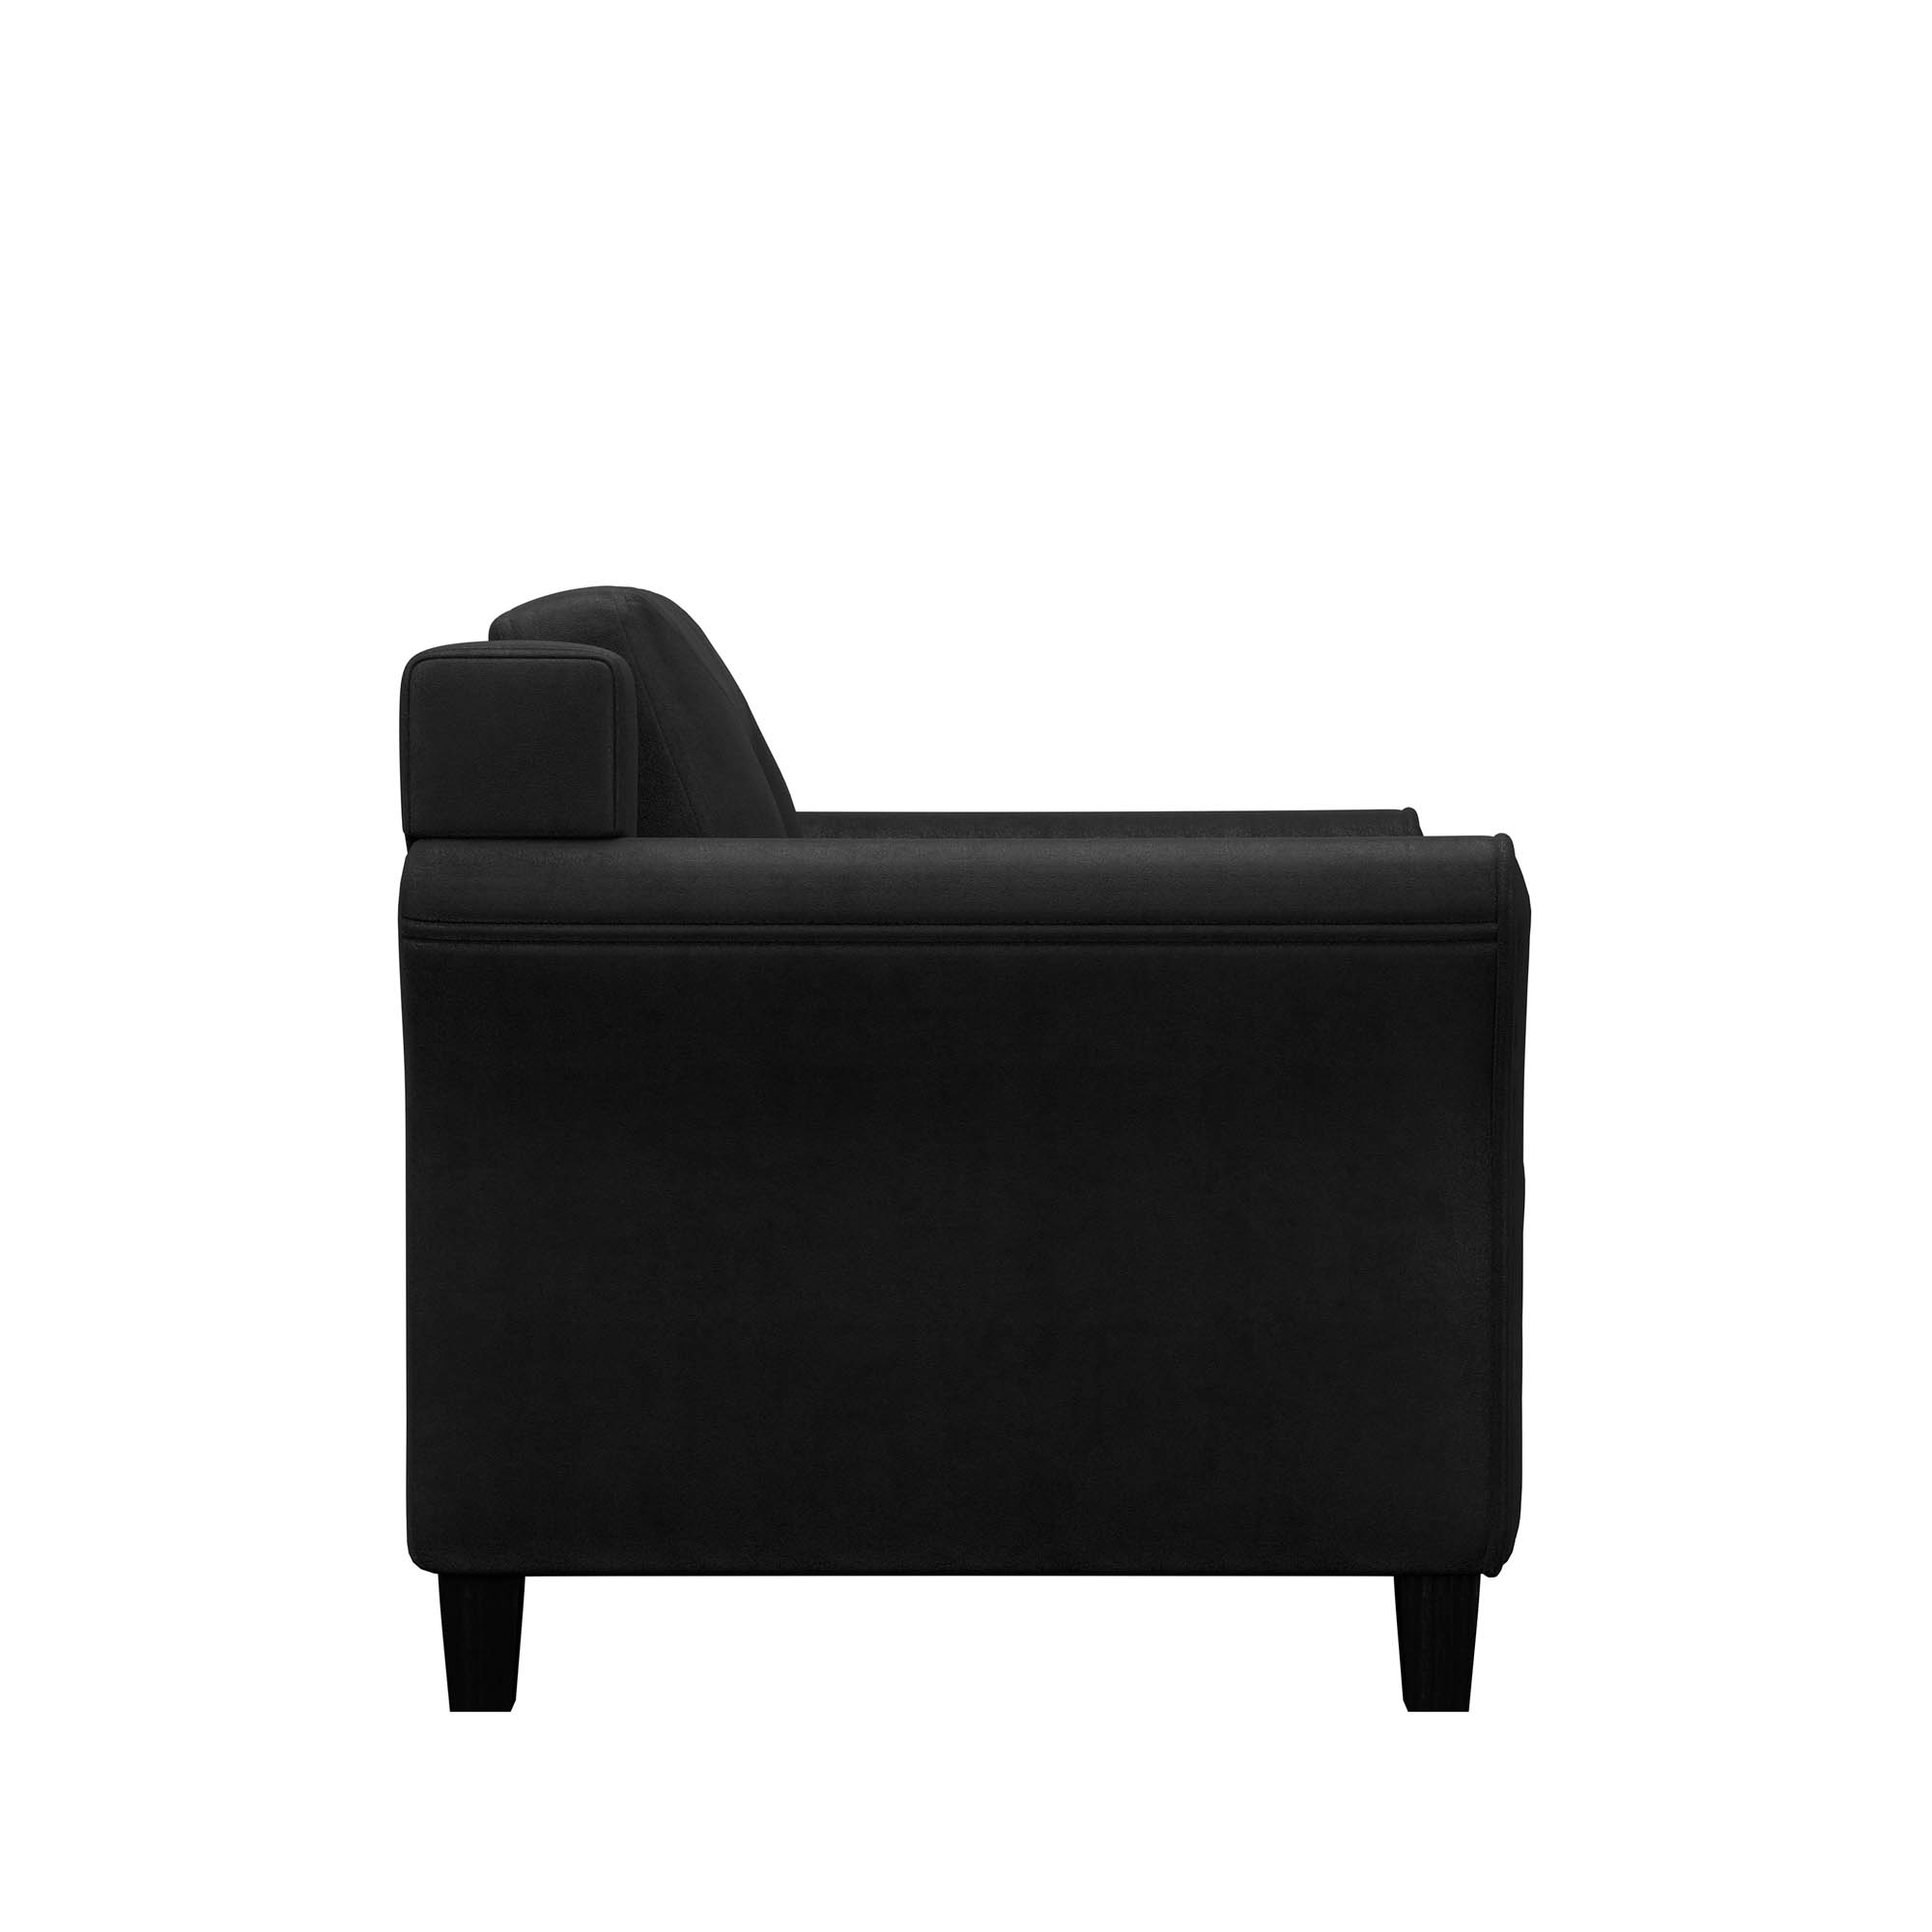 Lifestyle Solutions Taryn Club Chair, Black Fabric - image 5 of 17